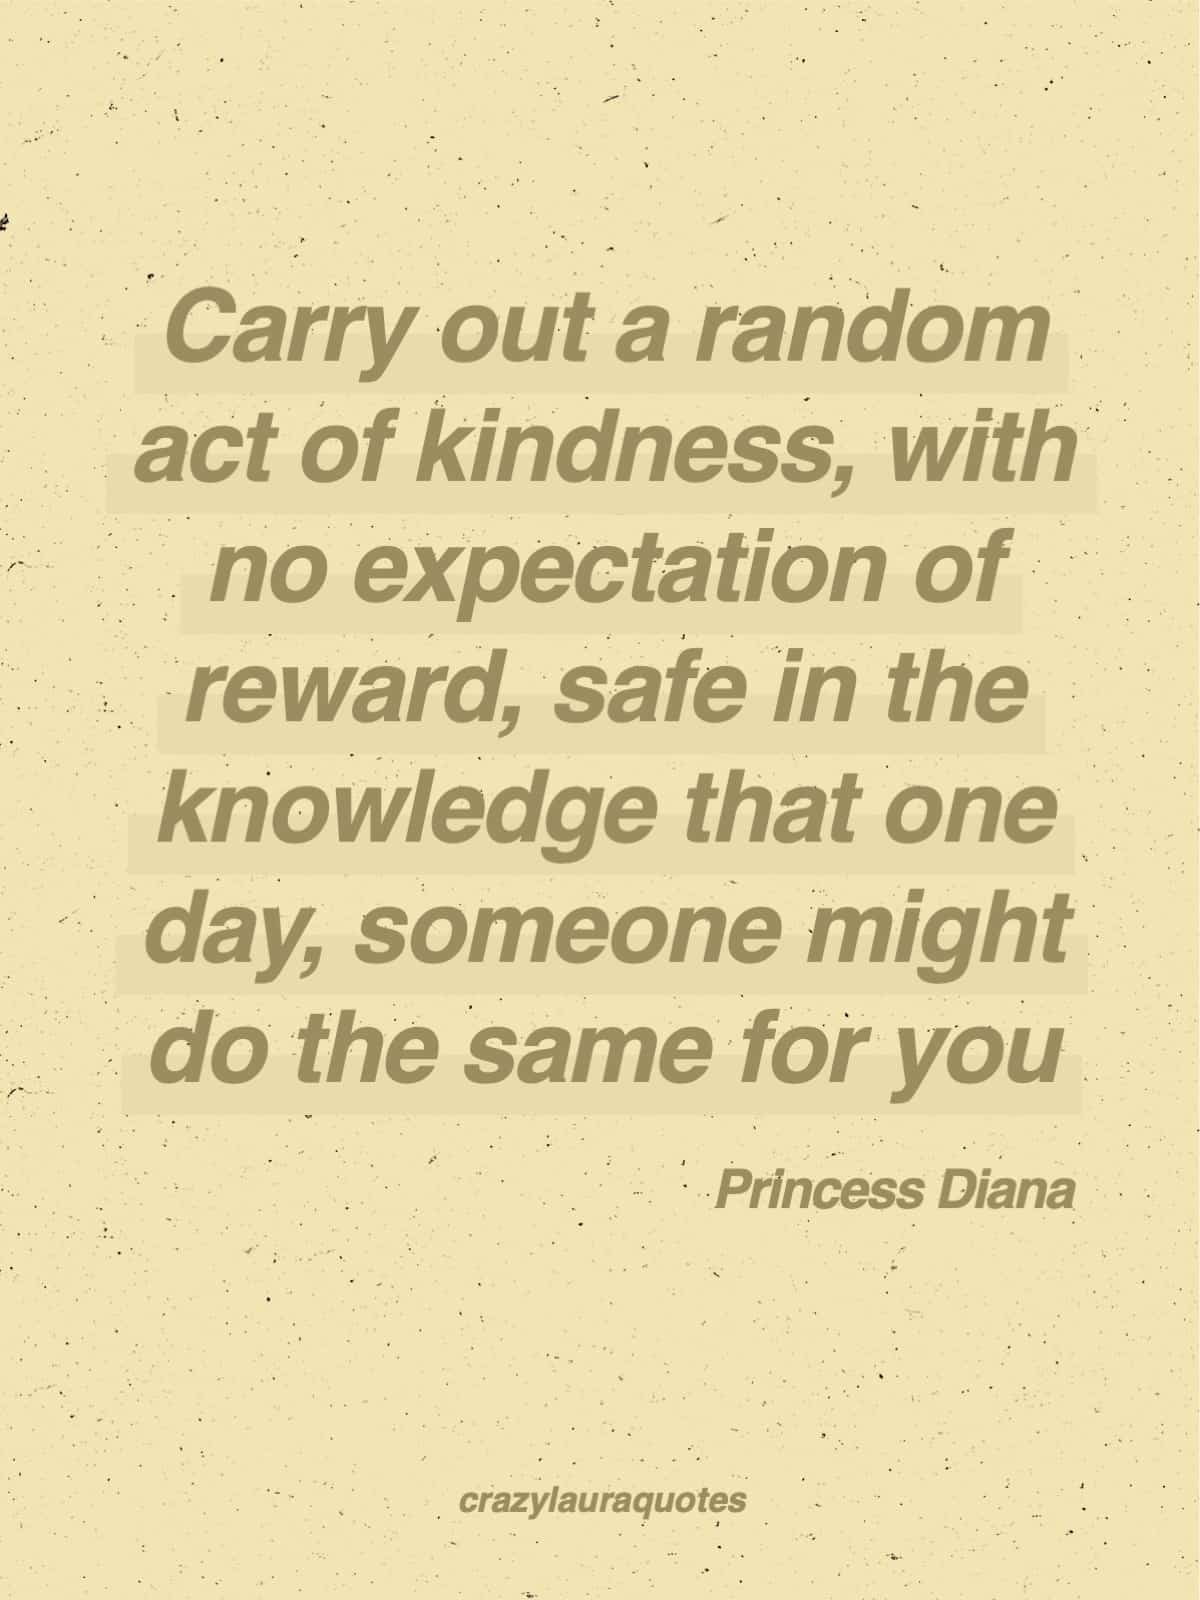 random act of kindness quote inspiration